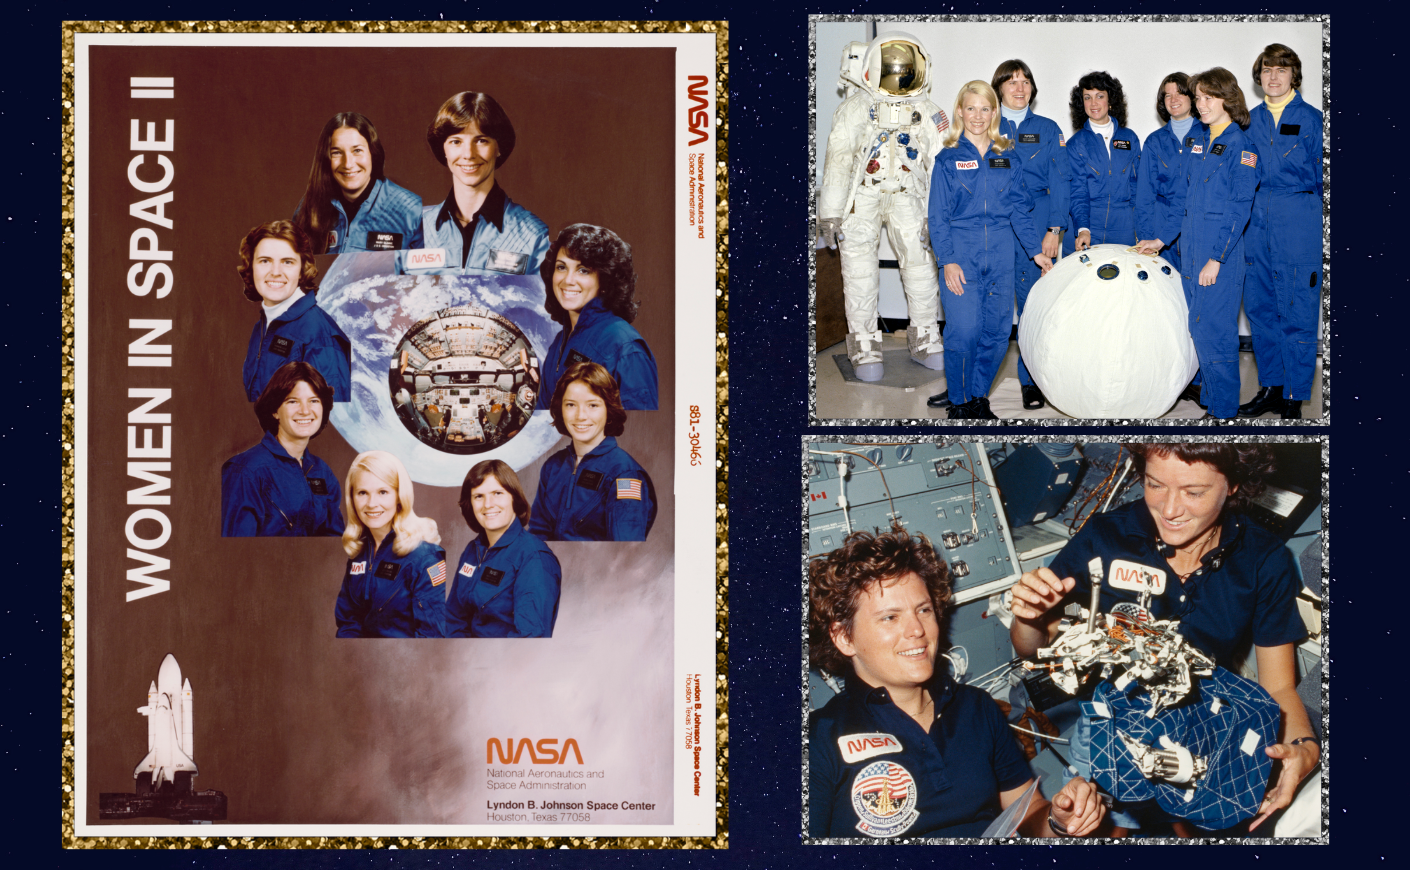 collage of the first female astronauts